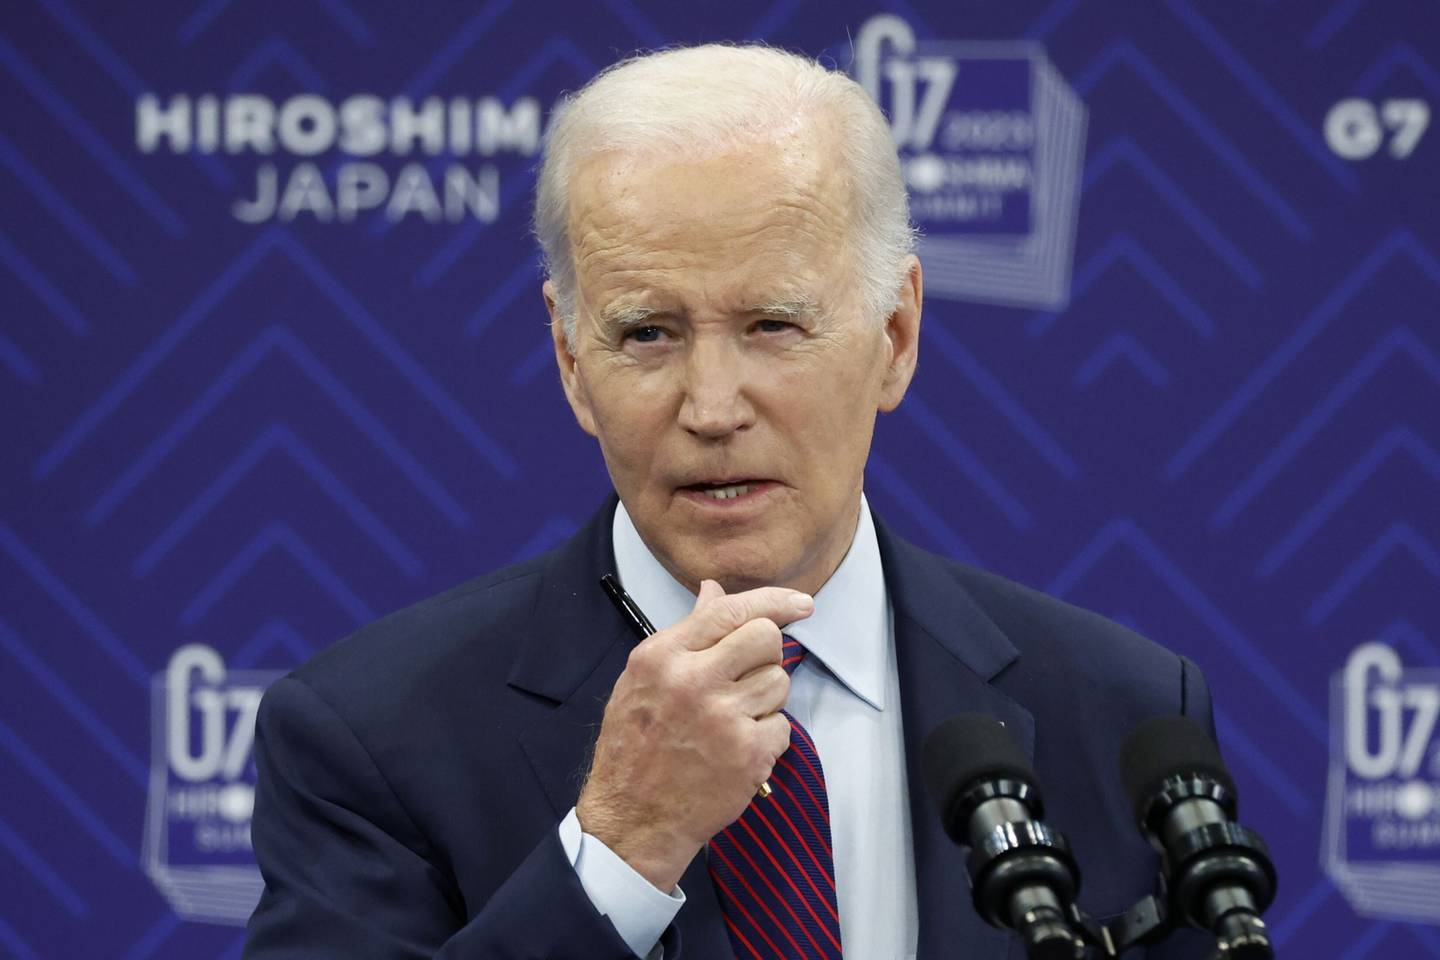 US President Joe Biden speaks during a news conference following the Group of Seven (G-7) leaders summit in Hiroshima, Japan, on Sunday, May 21, 2023. Biden called Republican demands for sharp spending cuts unacceptable and said hell talk with House Speaker Kevin McCarthy about debt-ceiling and budget negotiations on his flight back from Japan.